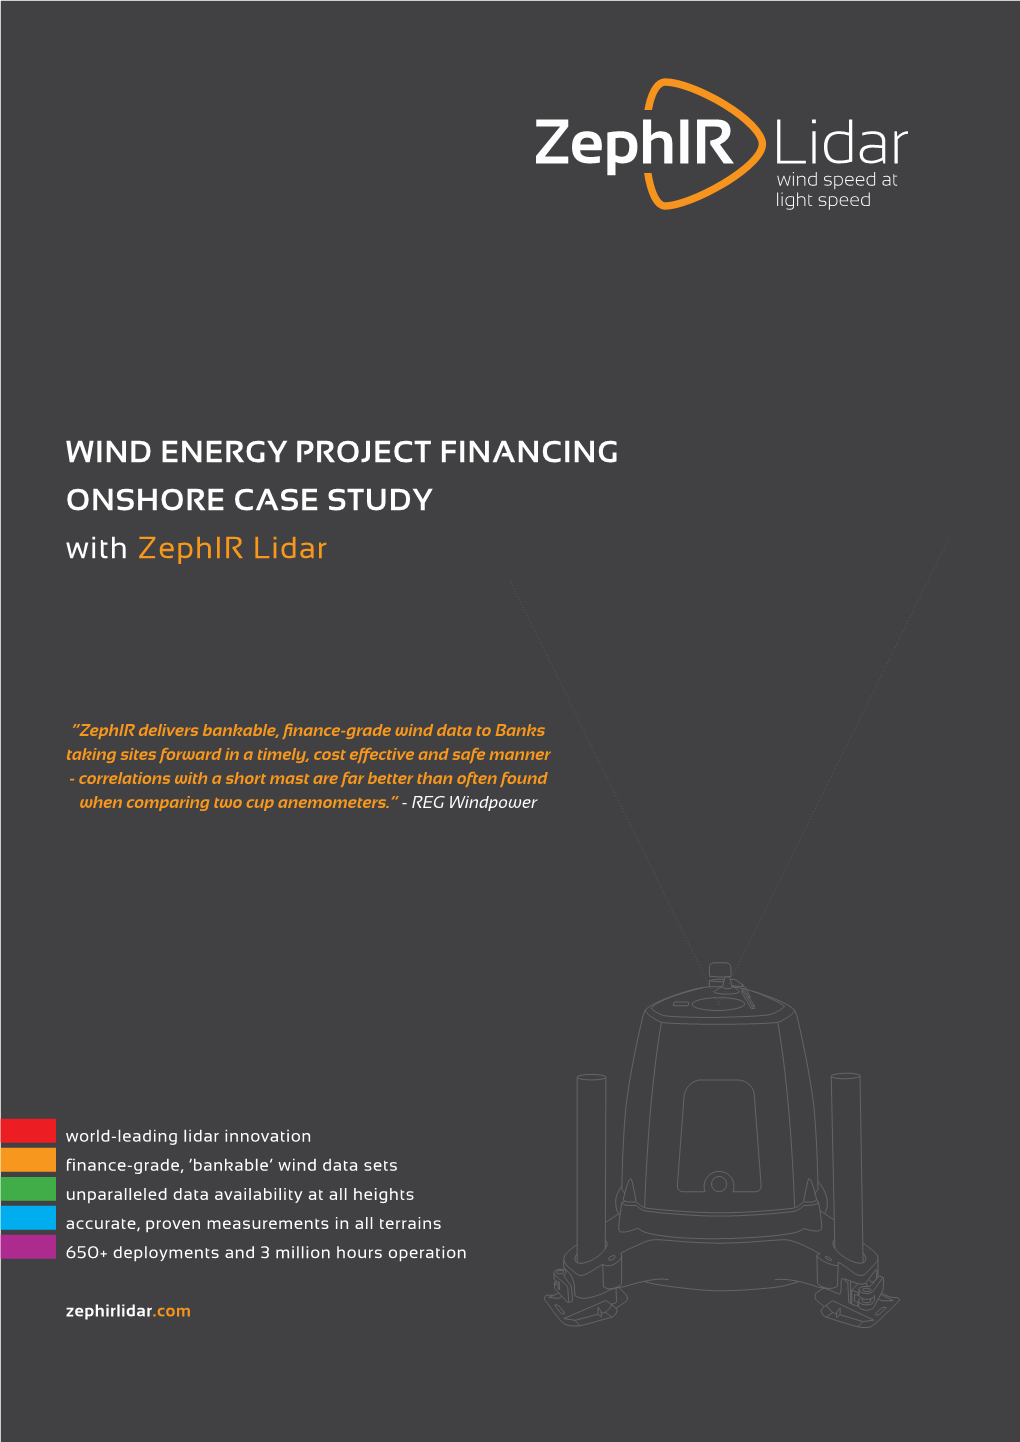 WIND ENERGY PROJECT FINANCING ONSHORE CASE STUDY with Zephir Lidar